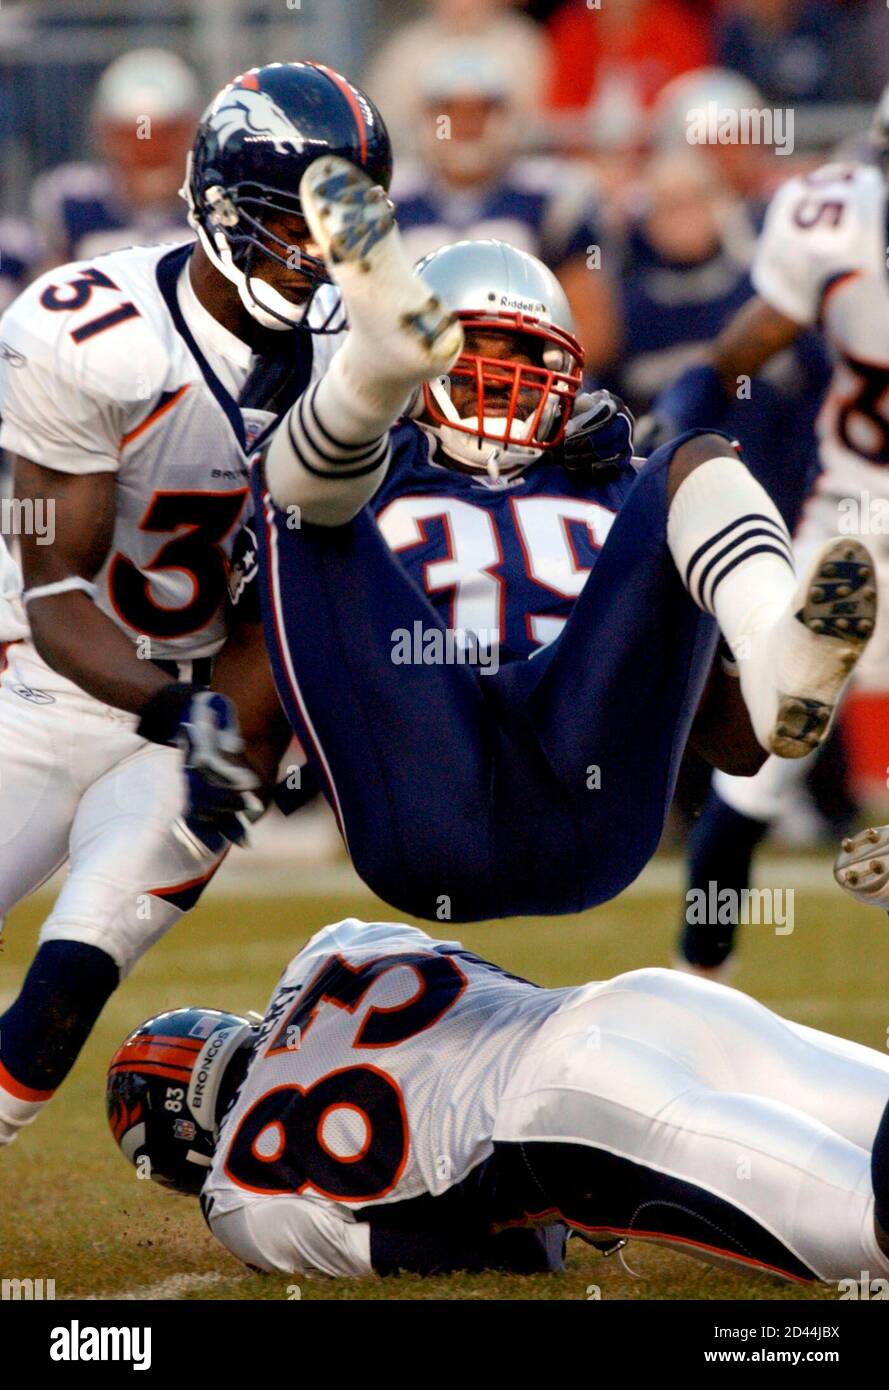 The Denver Broncos Kelly Herndon (31) and Scottie Montgomery (83) upend the New England Patriots Patrick Pass on Pass' kickoff return in first quarter action in Foxboro, Massachusetts October 27, 2002. REUTERS/Brian Snyder  BS Stock Photo